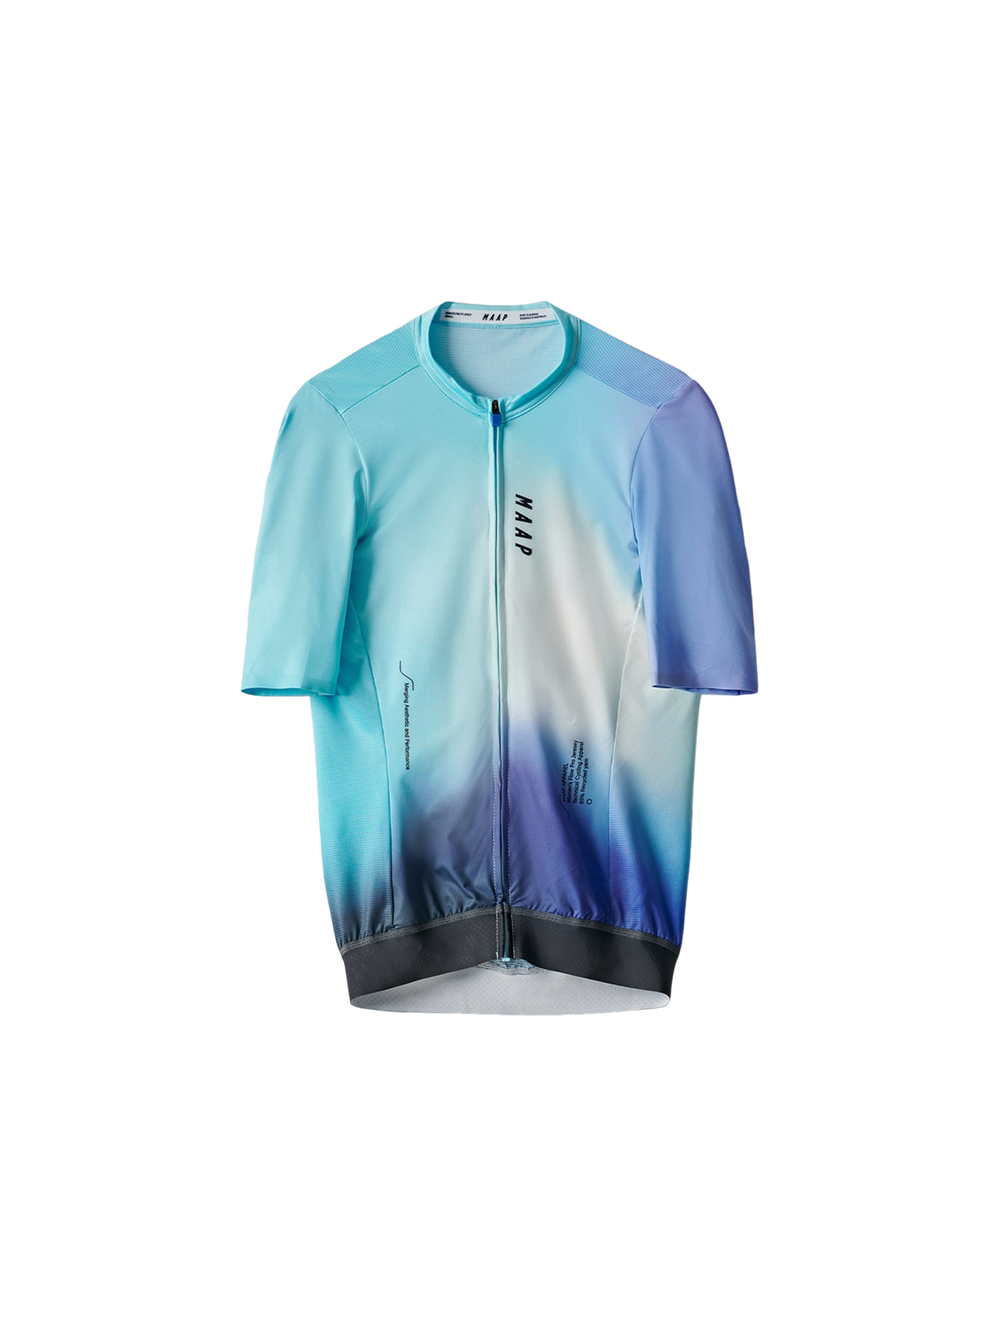 Product Image for Women's Flow Pro Jersey